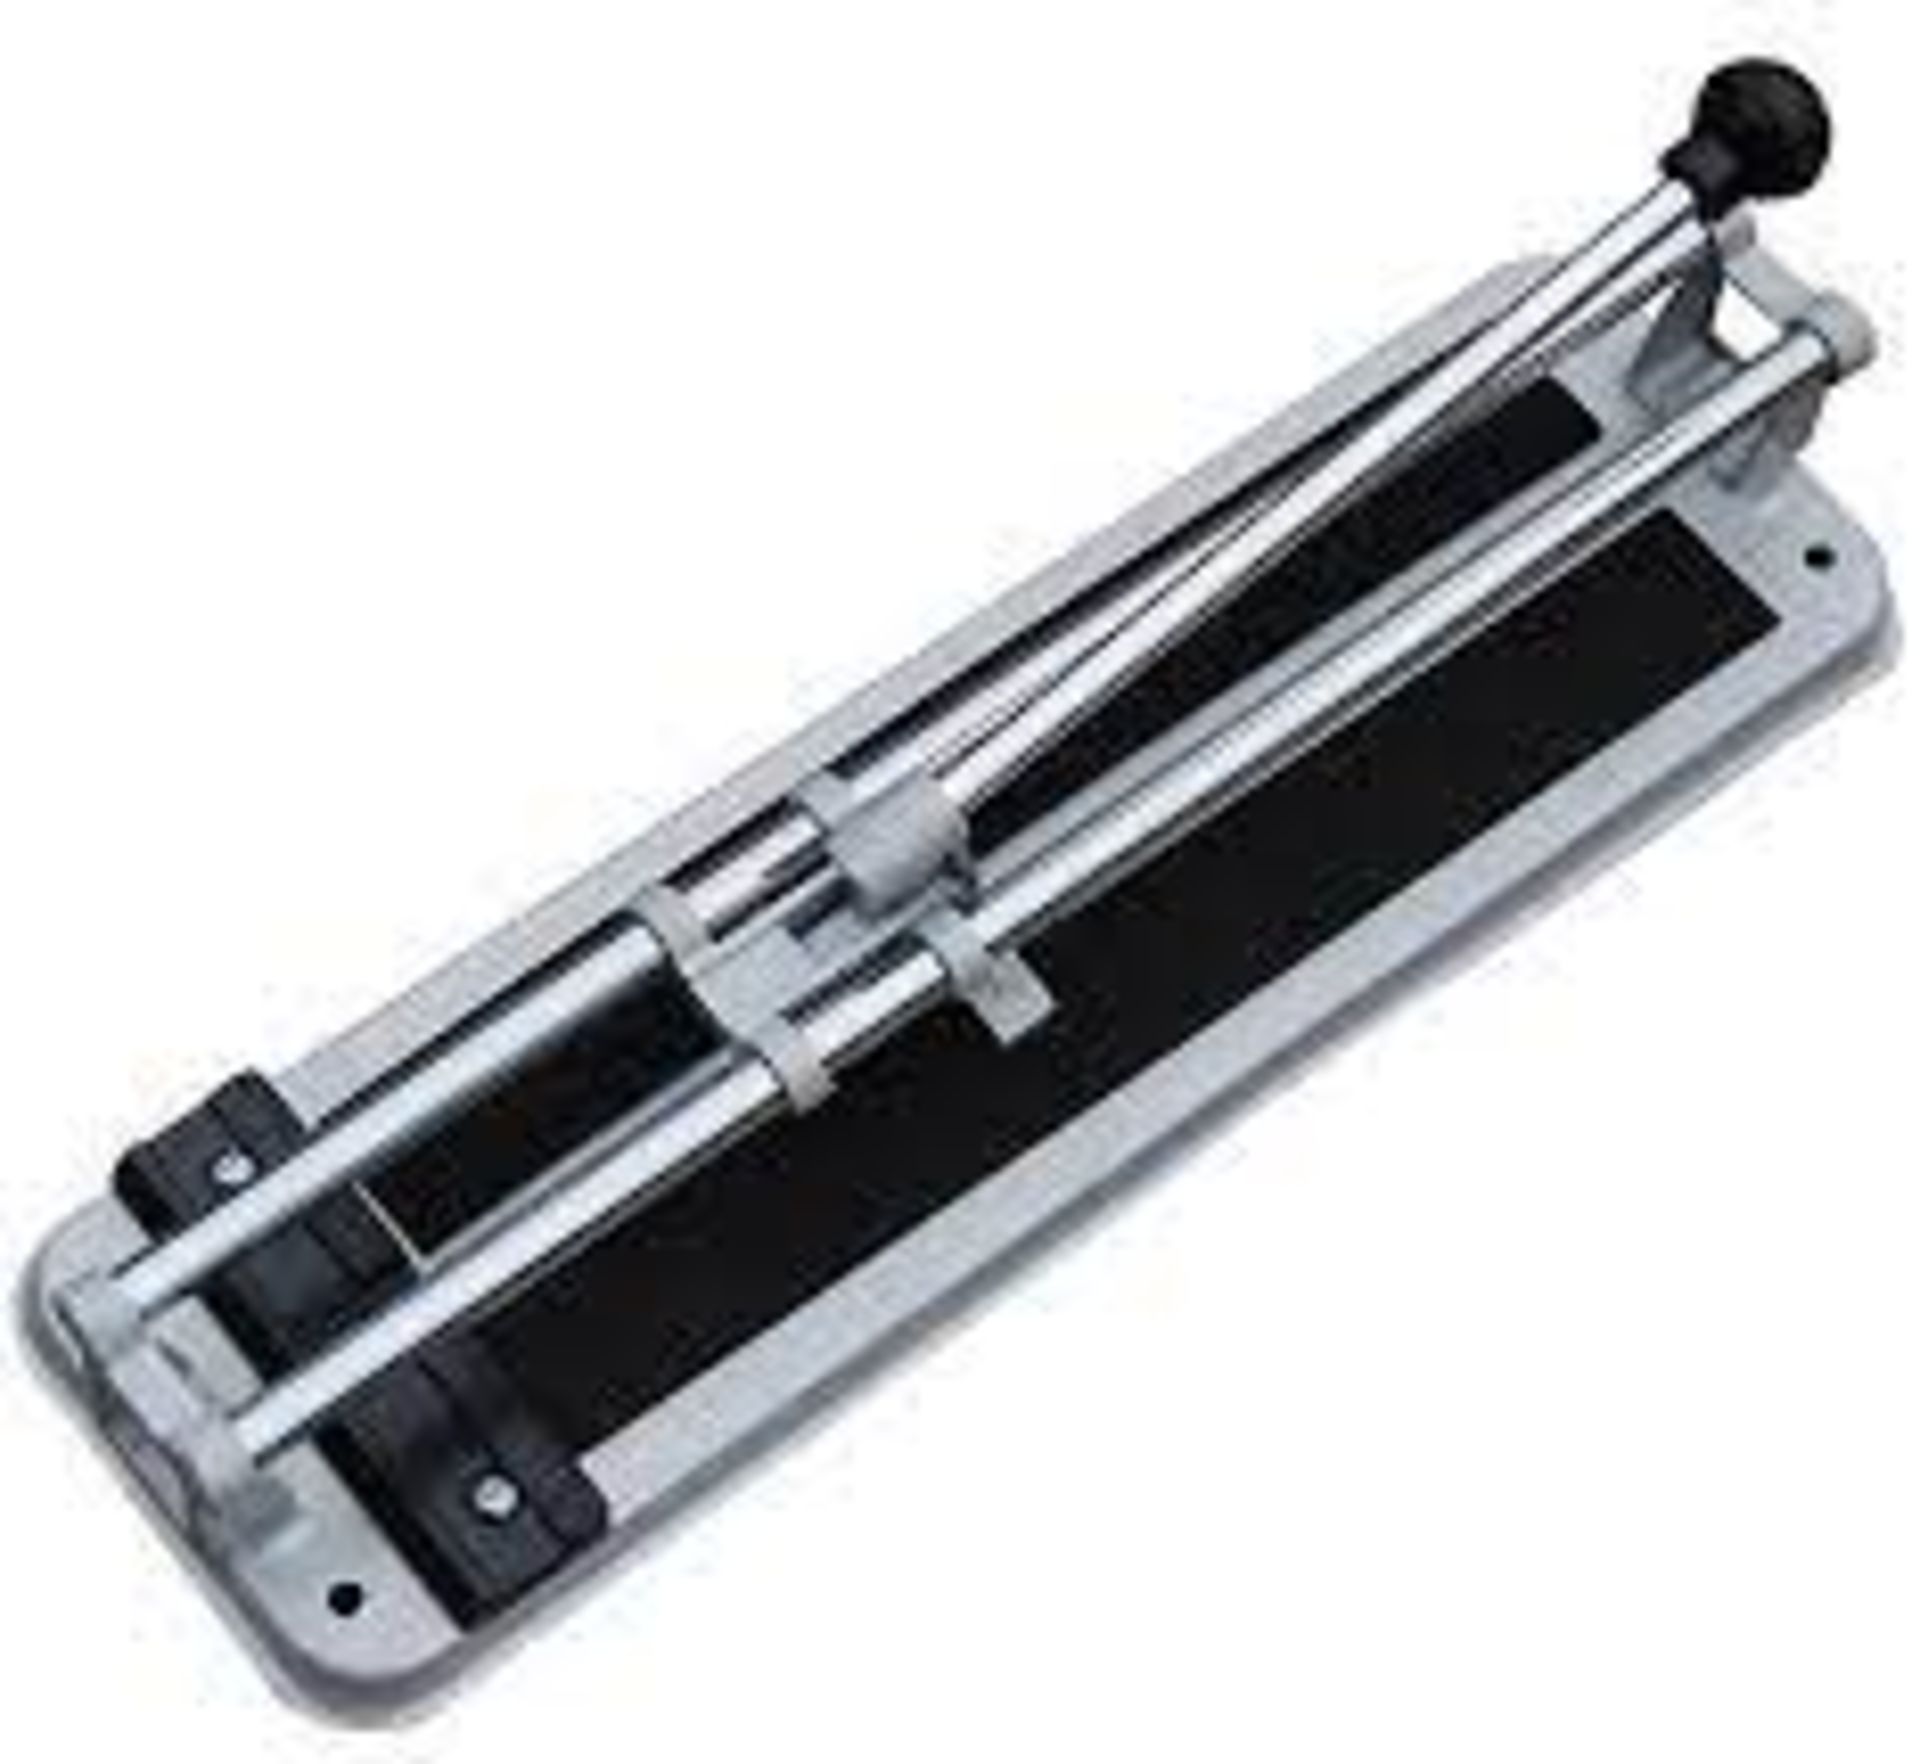 330mm Manual Tile cutter. - ER47. This Light duty 330mm tungsten carbide tile cutter with it's